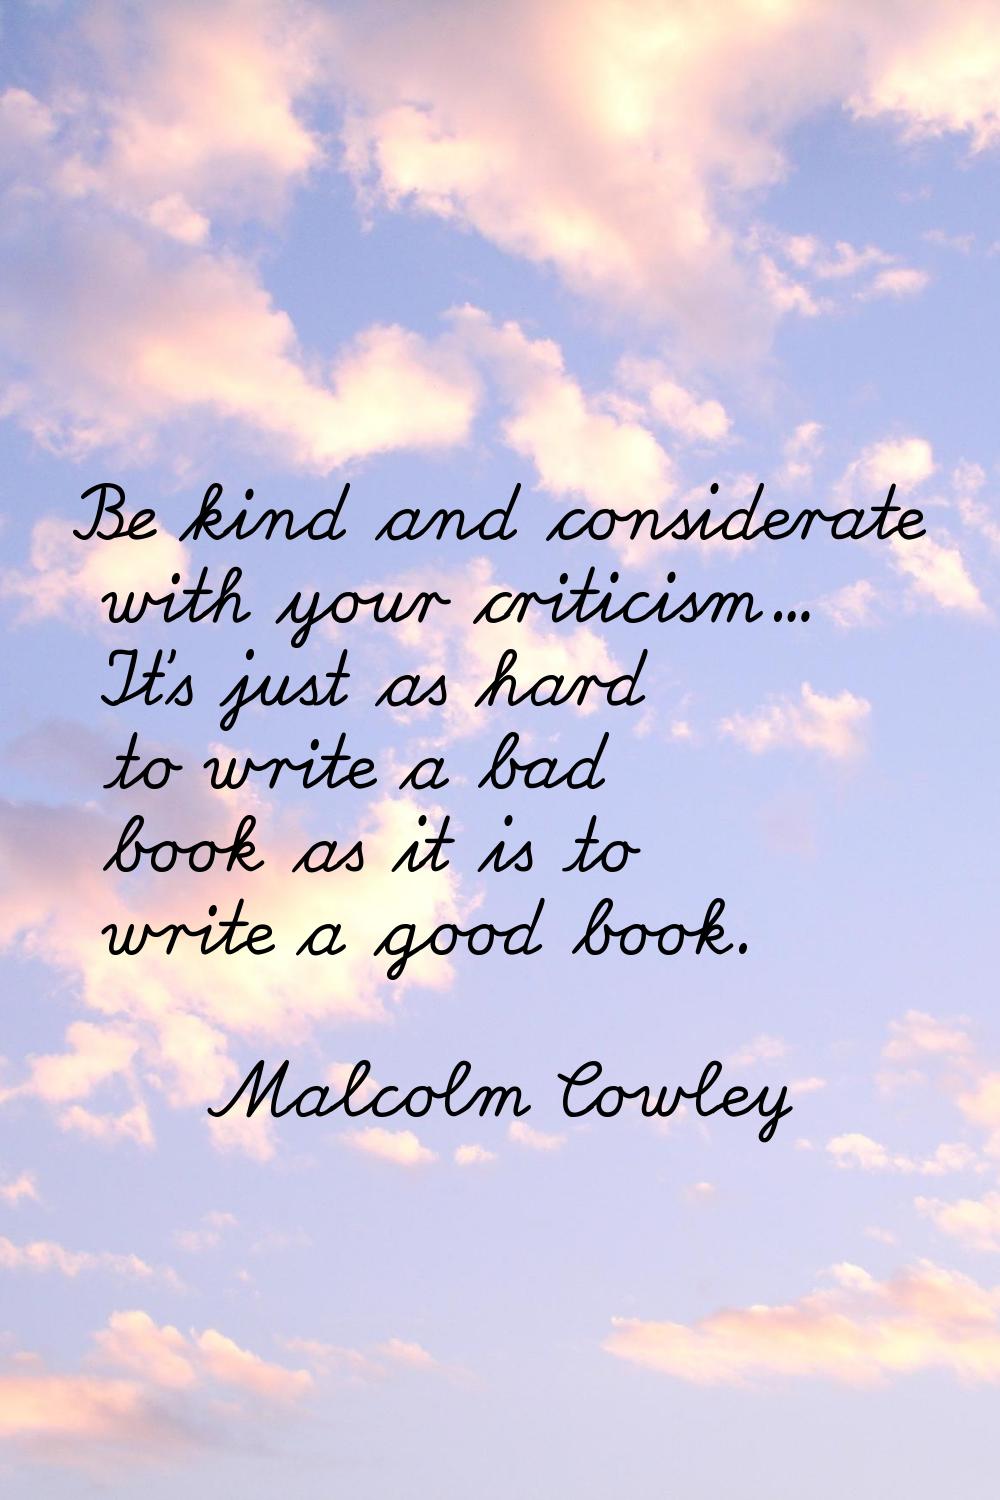 Be kind and considerate with your criticism... It's just as hard to write a bad book as it is to wr